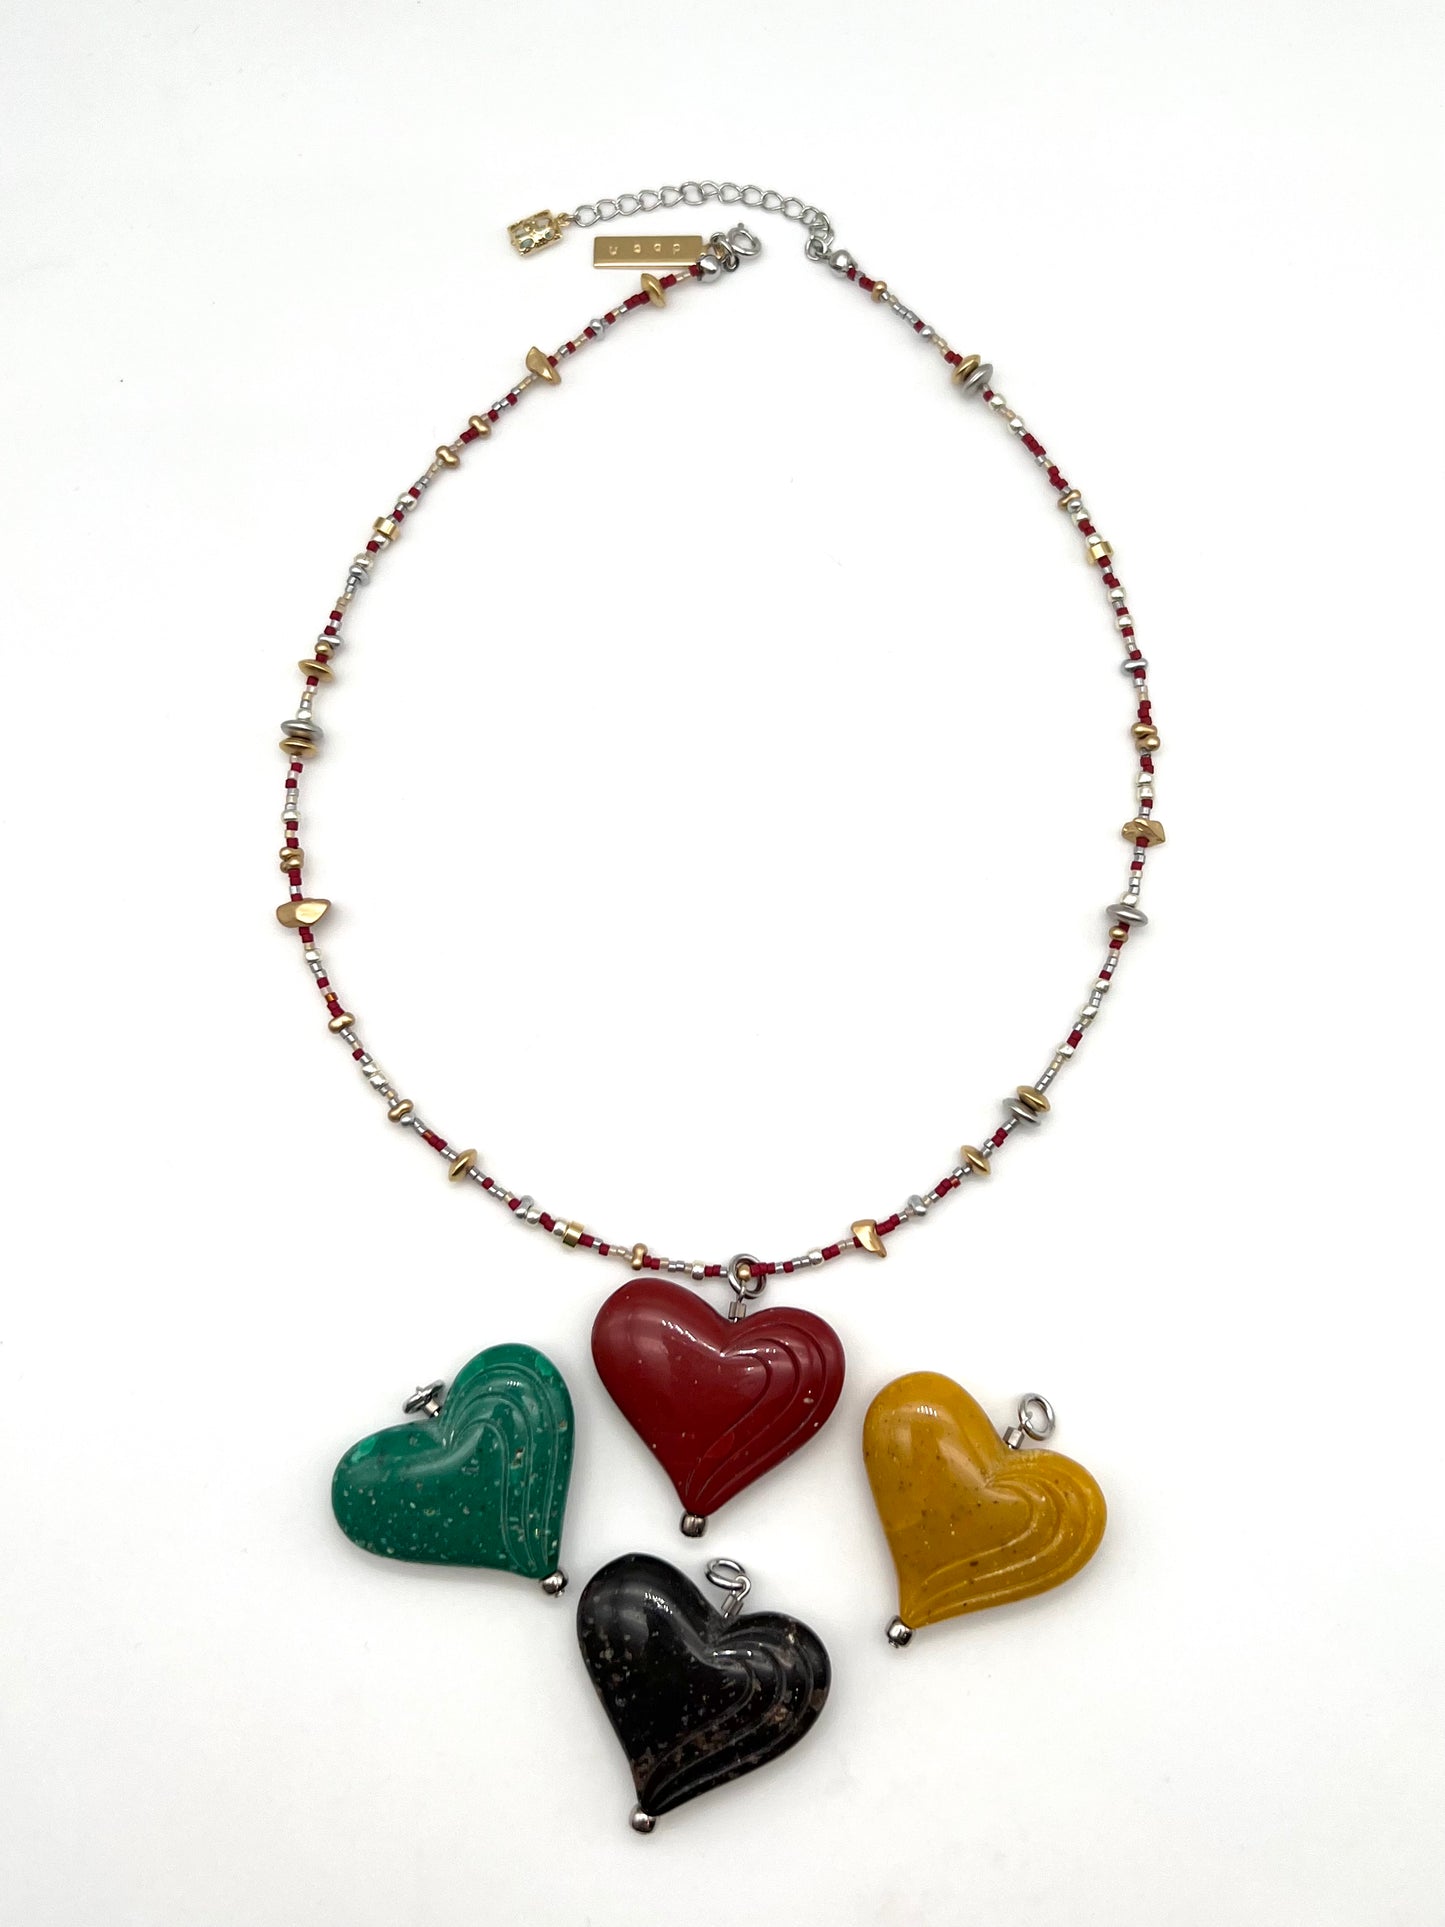 Heart beads necklace